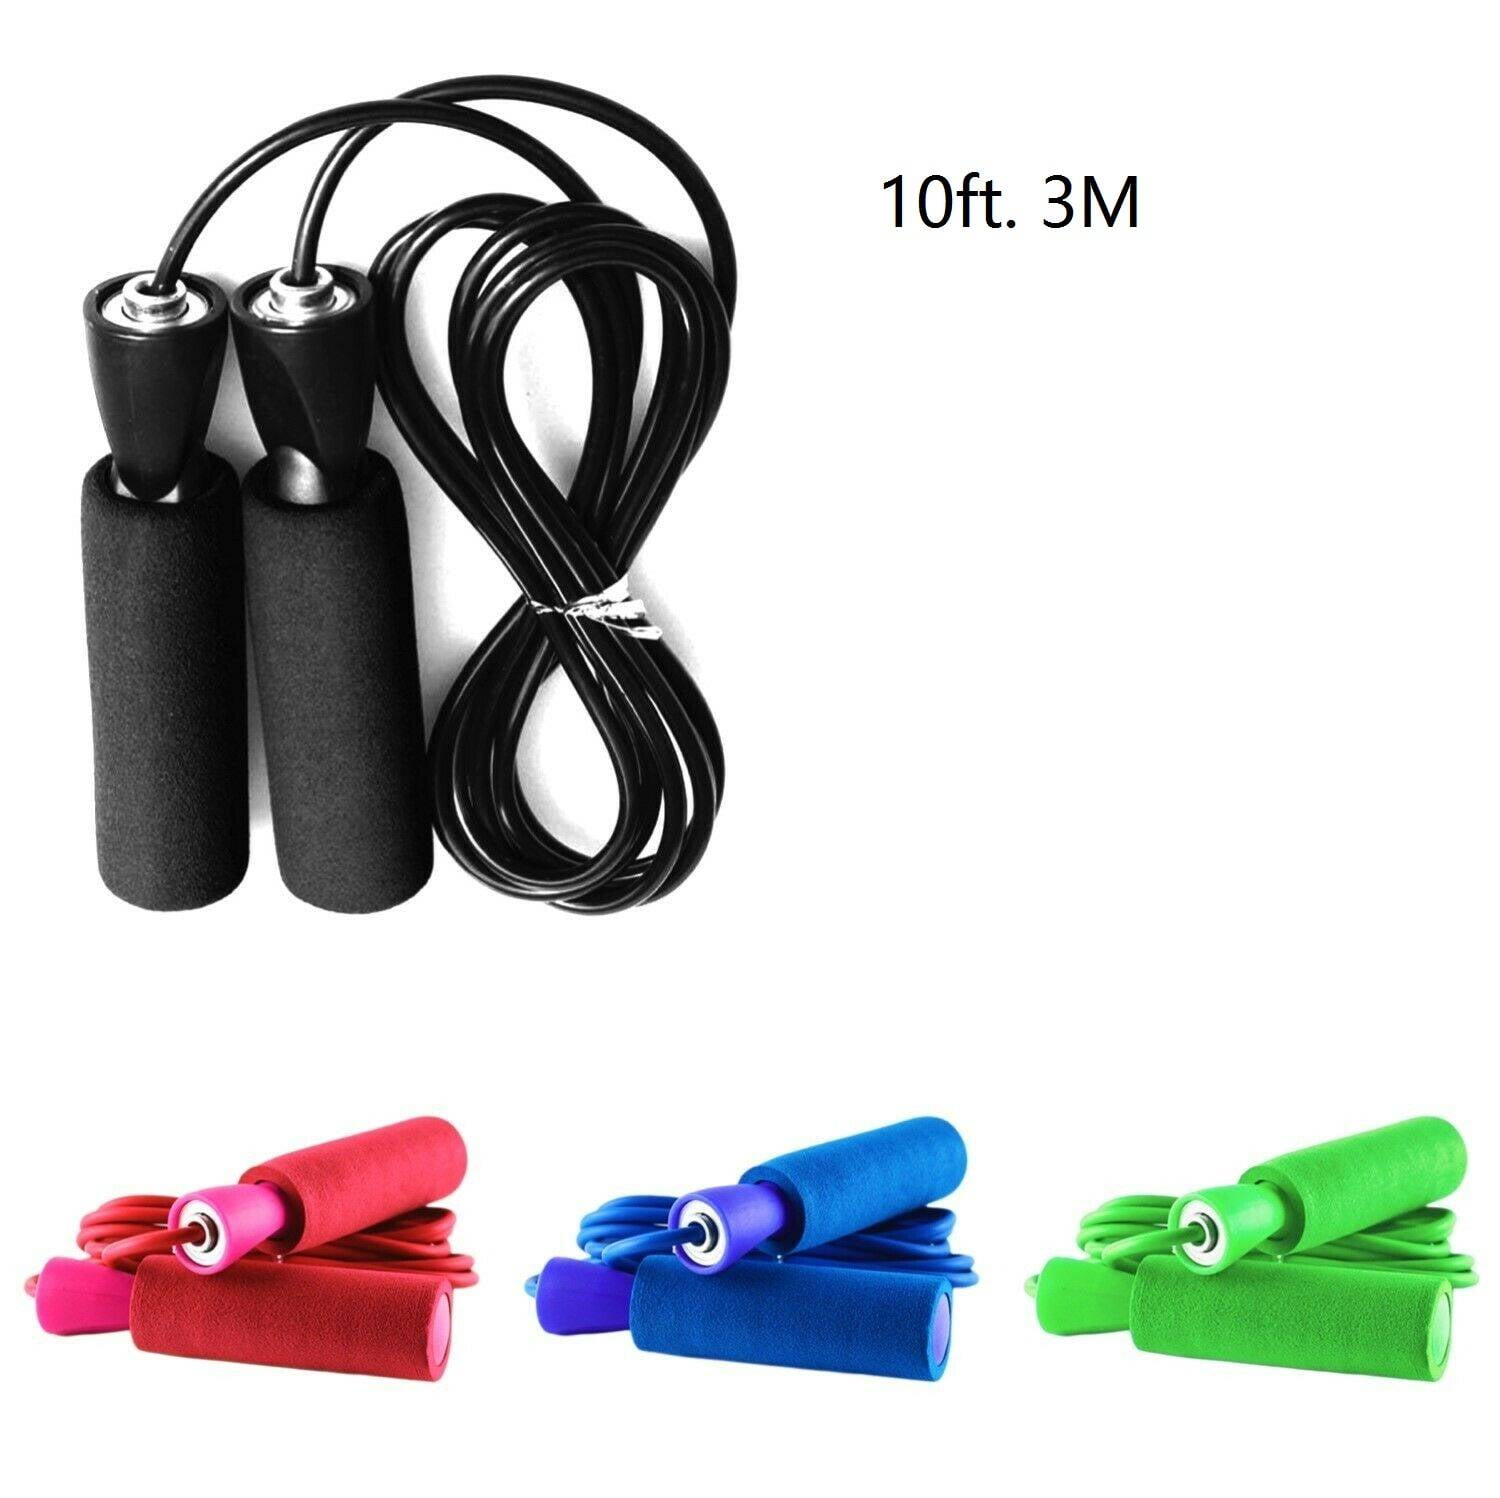 3M Speed Jump Rope Boxing Skipping Aerobic Exercise Adjustable Bearing Fitness 